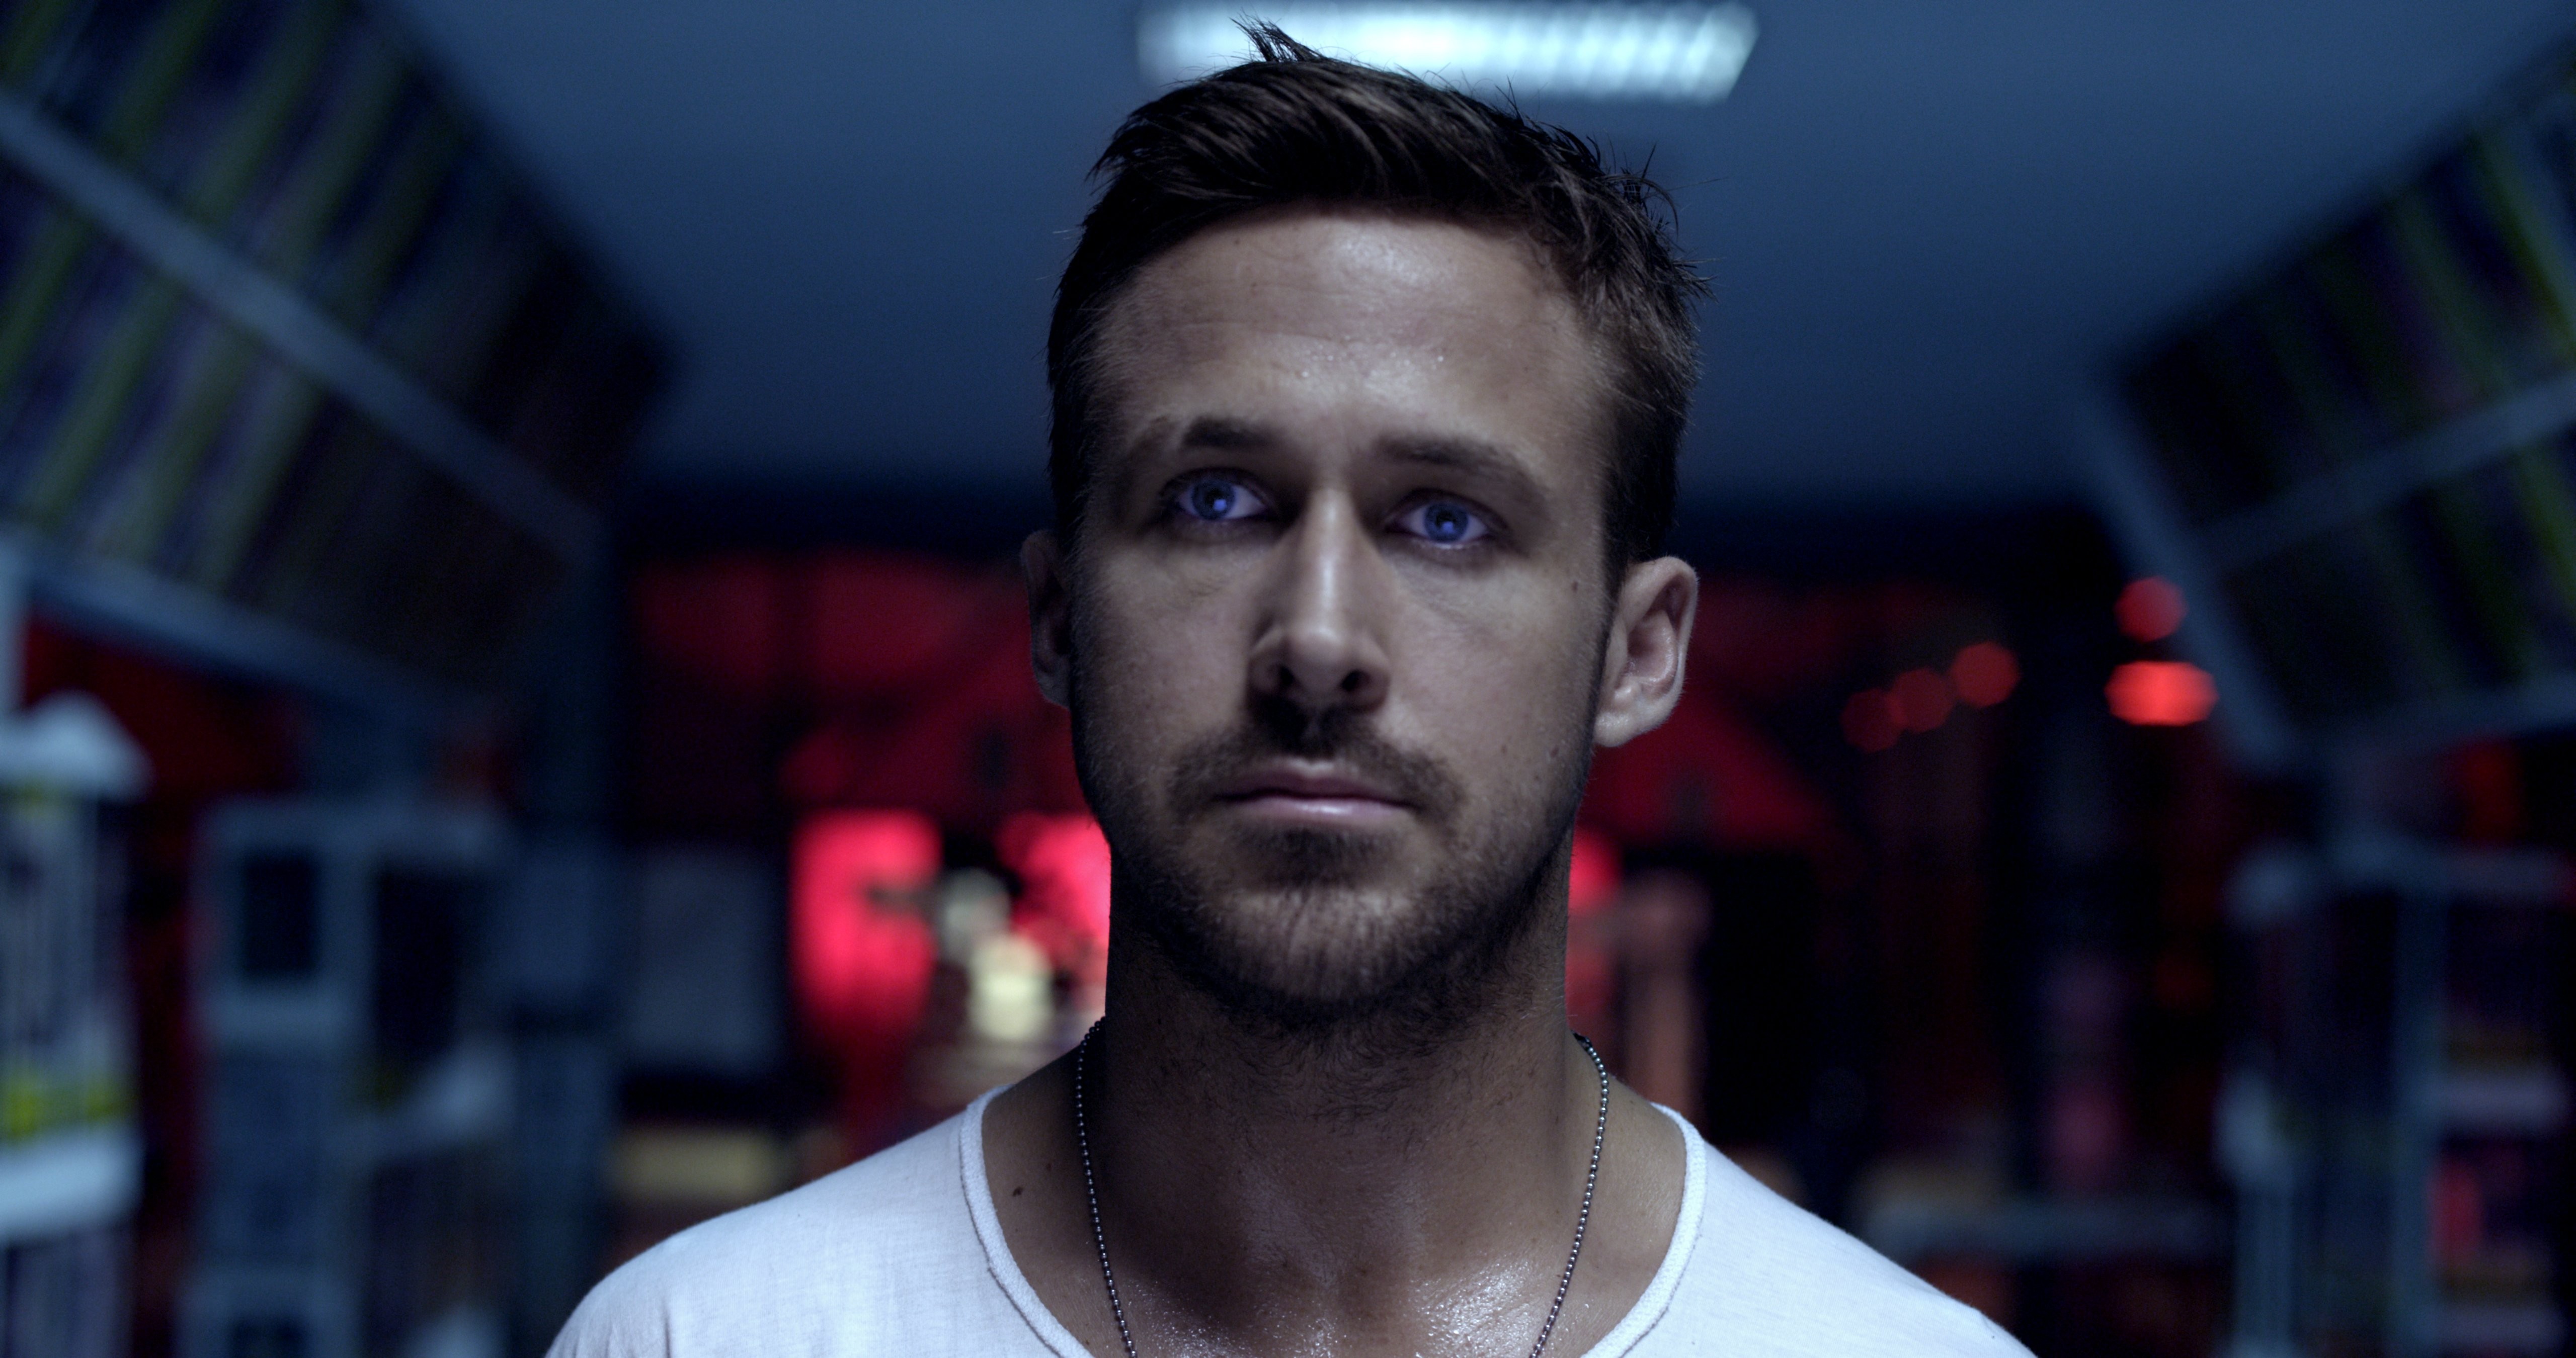 1366x768 Ryan Gosling 1366x768 Resolution Hd 4k Wallpapers Images Backgrounds Photos And Pictures 